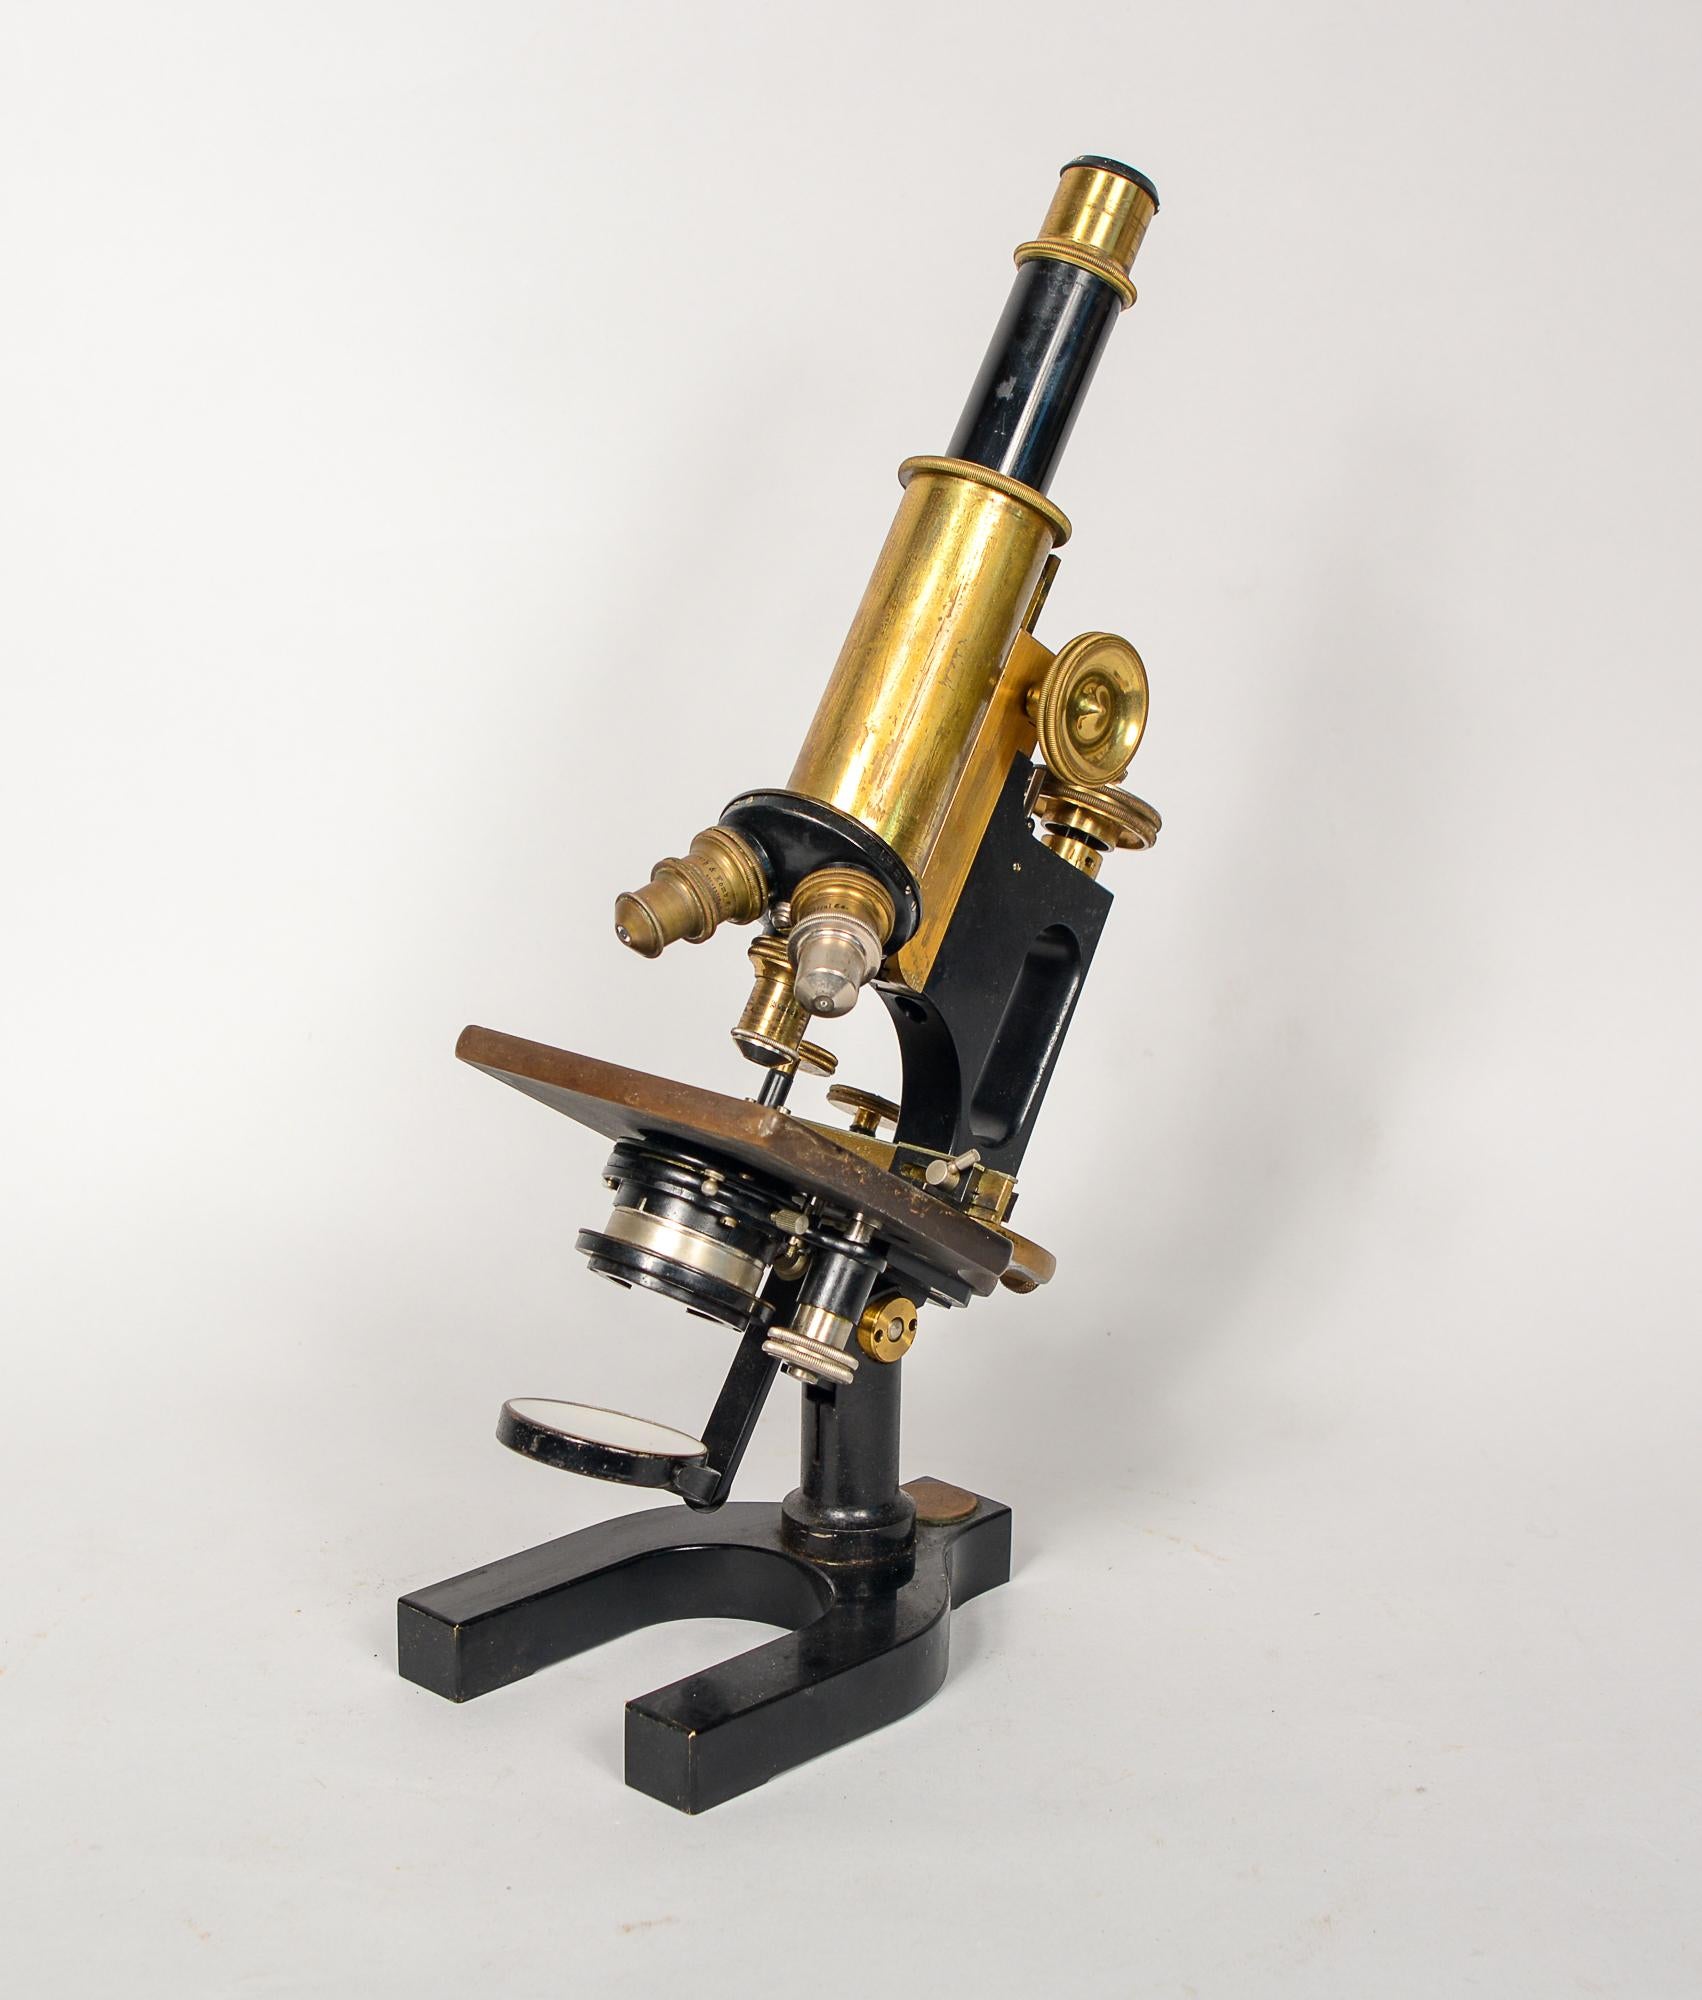 Bausch and Lomb jug handle microscope. This microscope has three objectives. The microscope is 4.25 inches deep, 7 inches wide and 13 inches tall. This is from an older collection belonging to a doctor. We do not know the functionality of this.